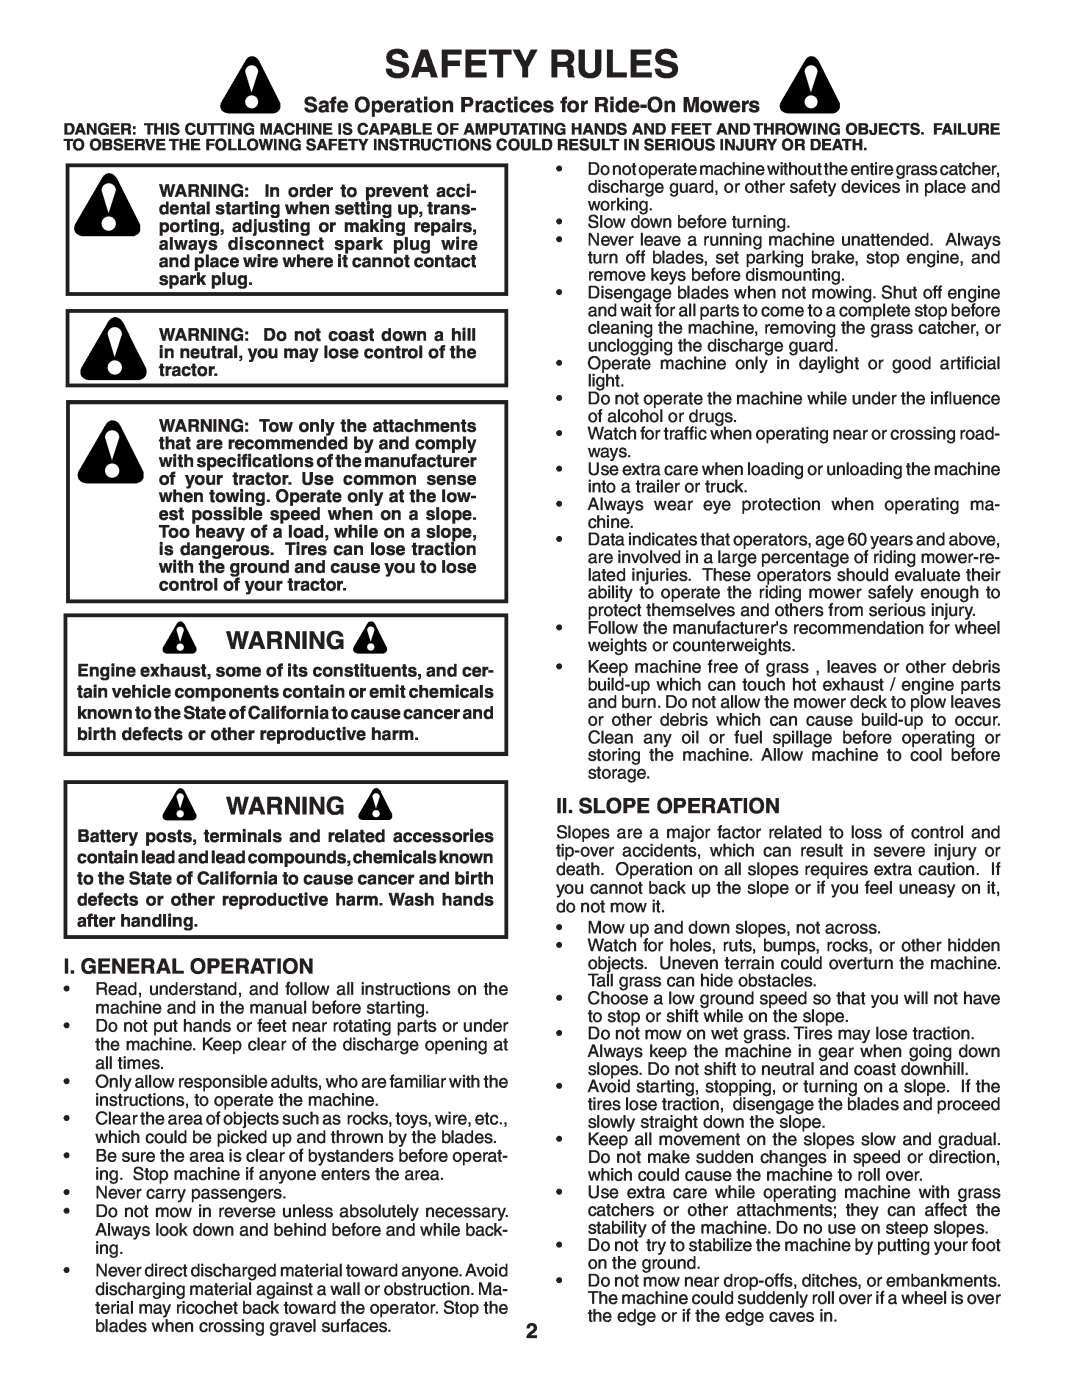 Murray MB1842LT manual Safety Rules, Safe Operation Practices for Ride-On Mowers, I. General Operation, Ii. Slope Operation 